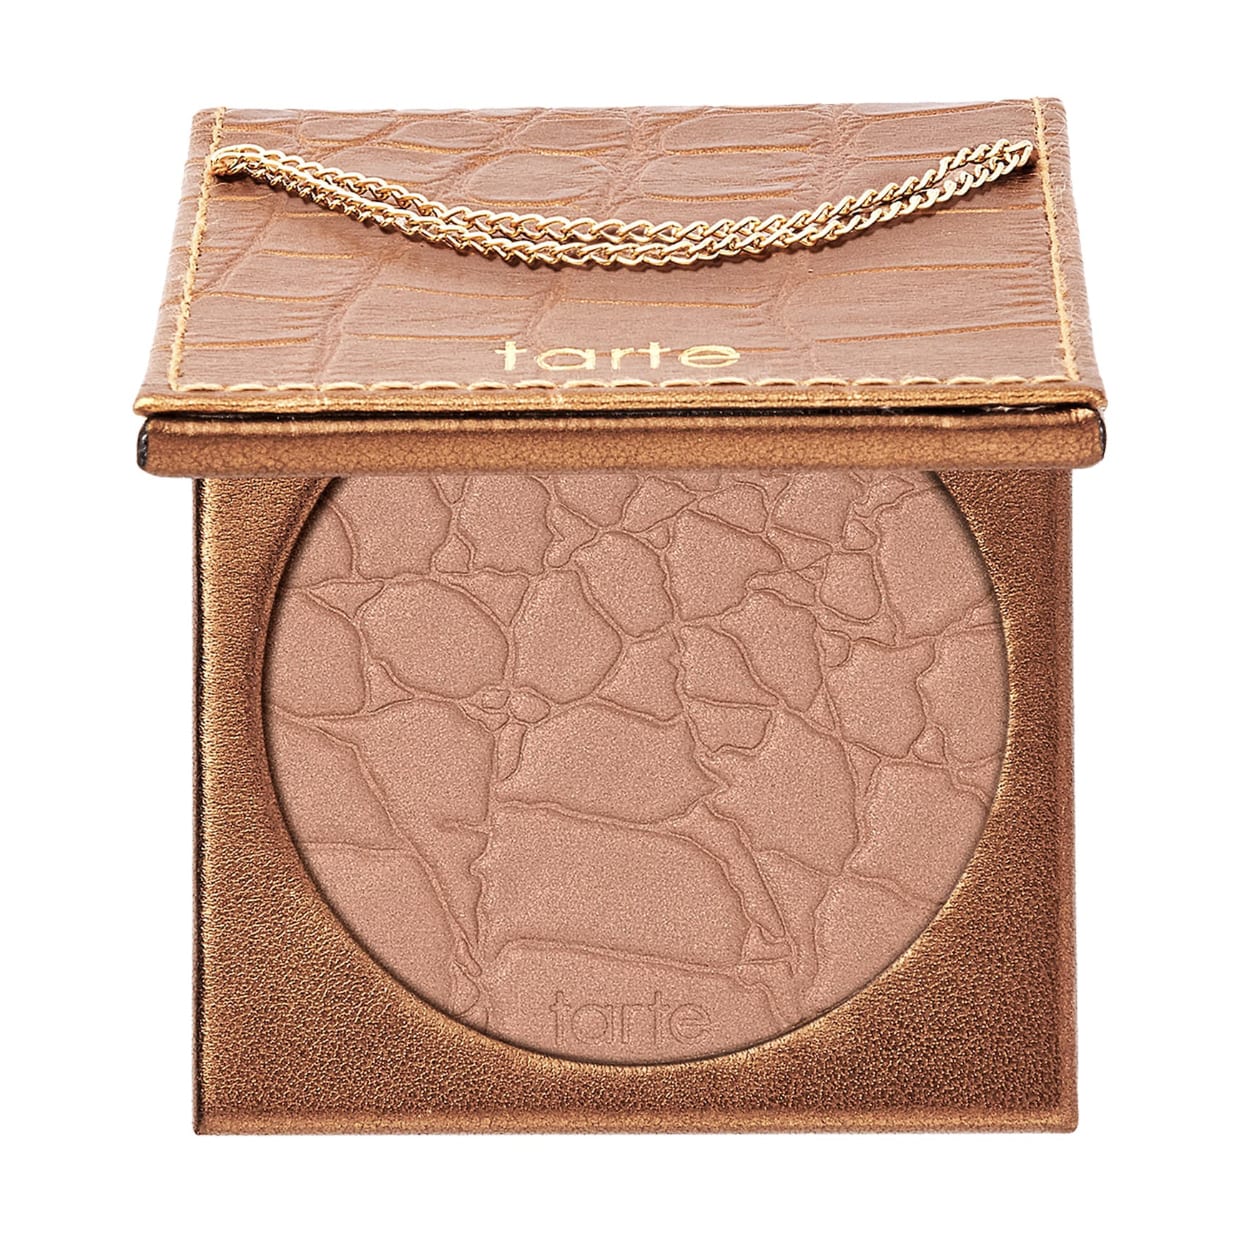 A square compact of bronzing powder.